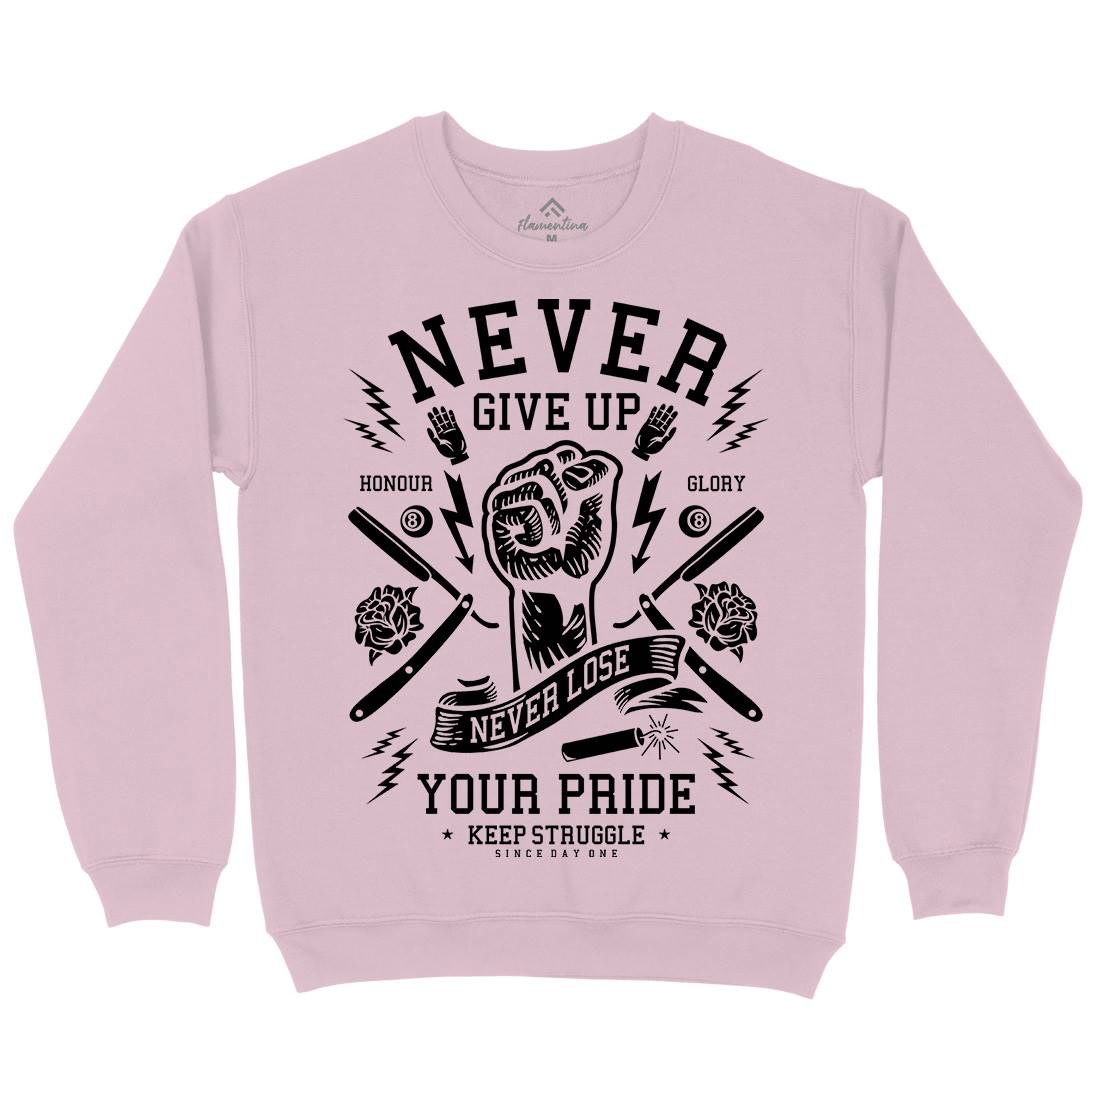 Never Give Up Kids Crew Neck Sweatshirt Quotes A254